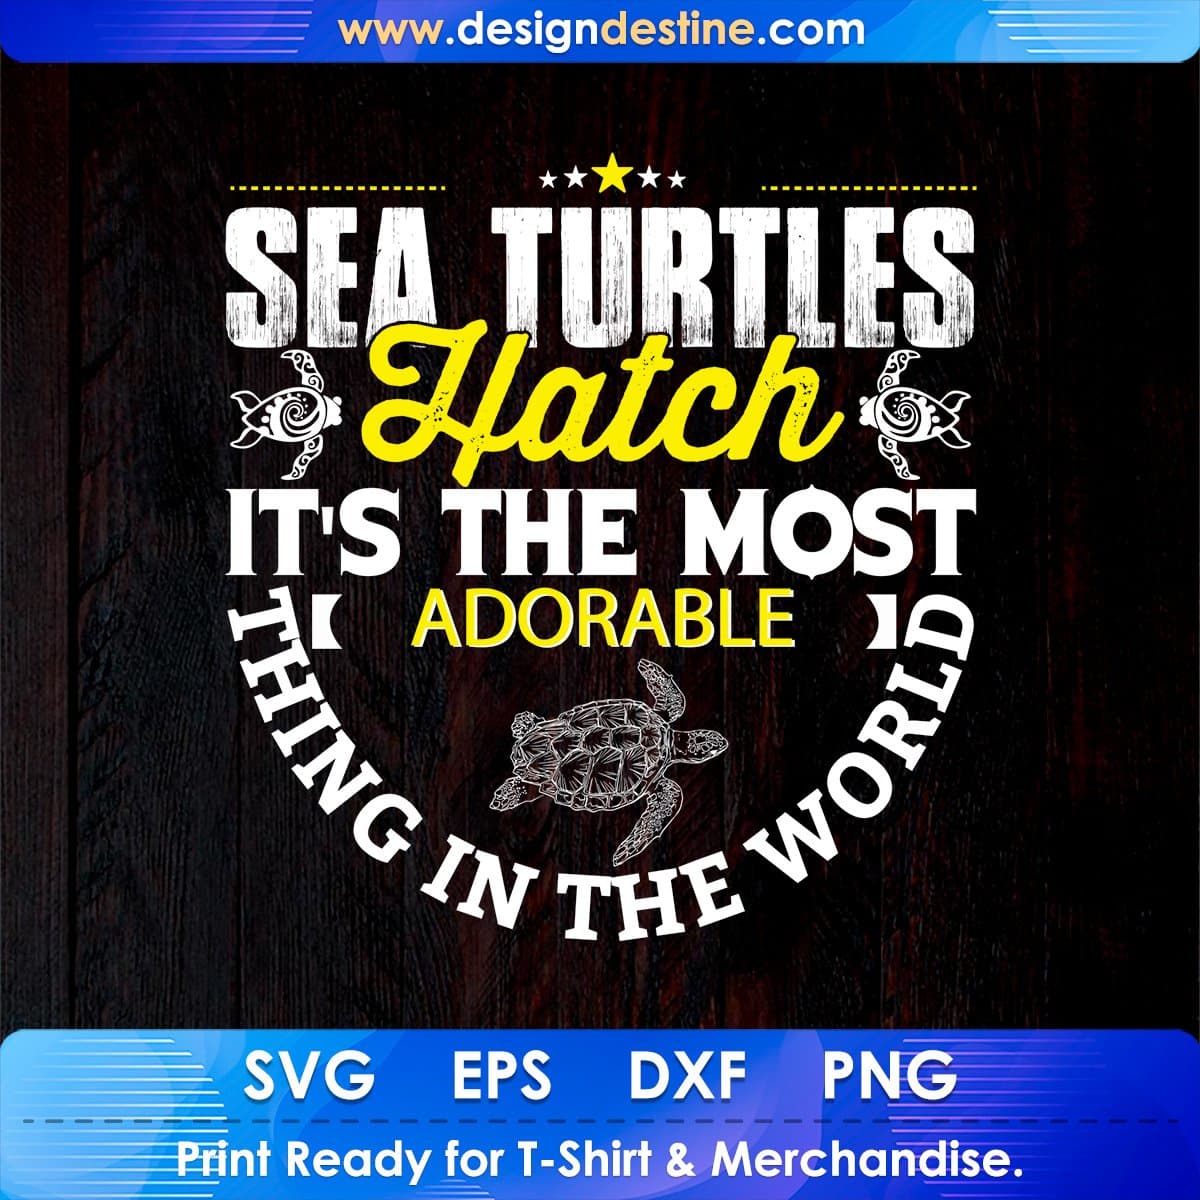 Sea Turtles Hatch It's The Most Adorable Think In The World T shirt Design In Svg Png Files